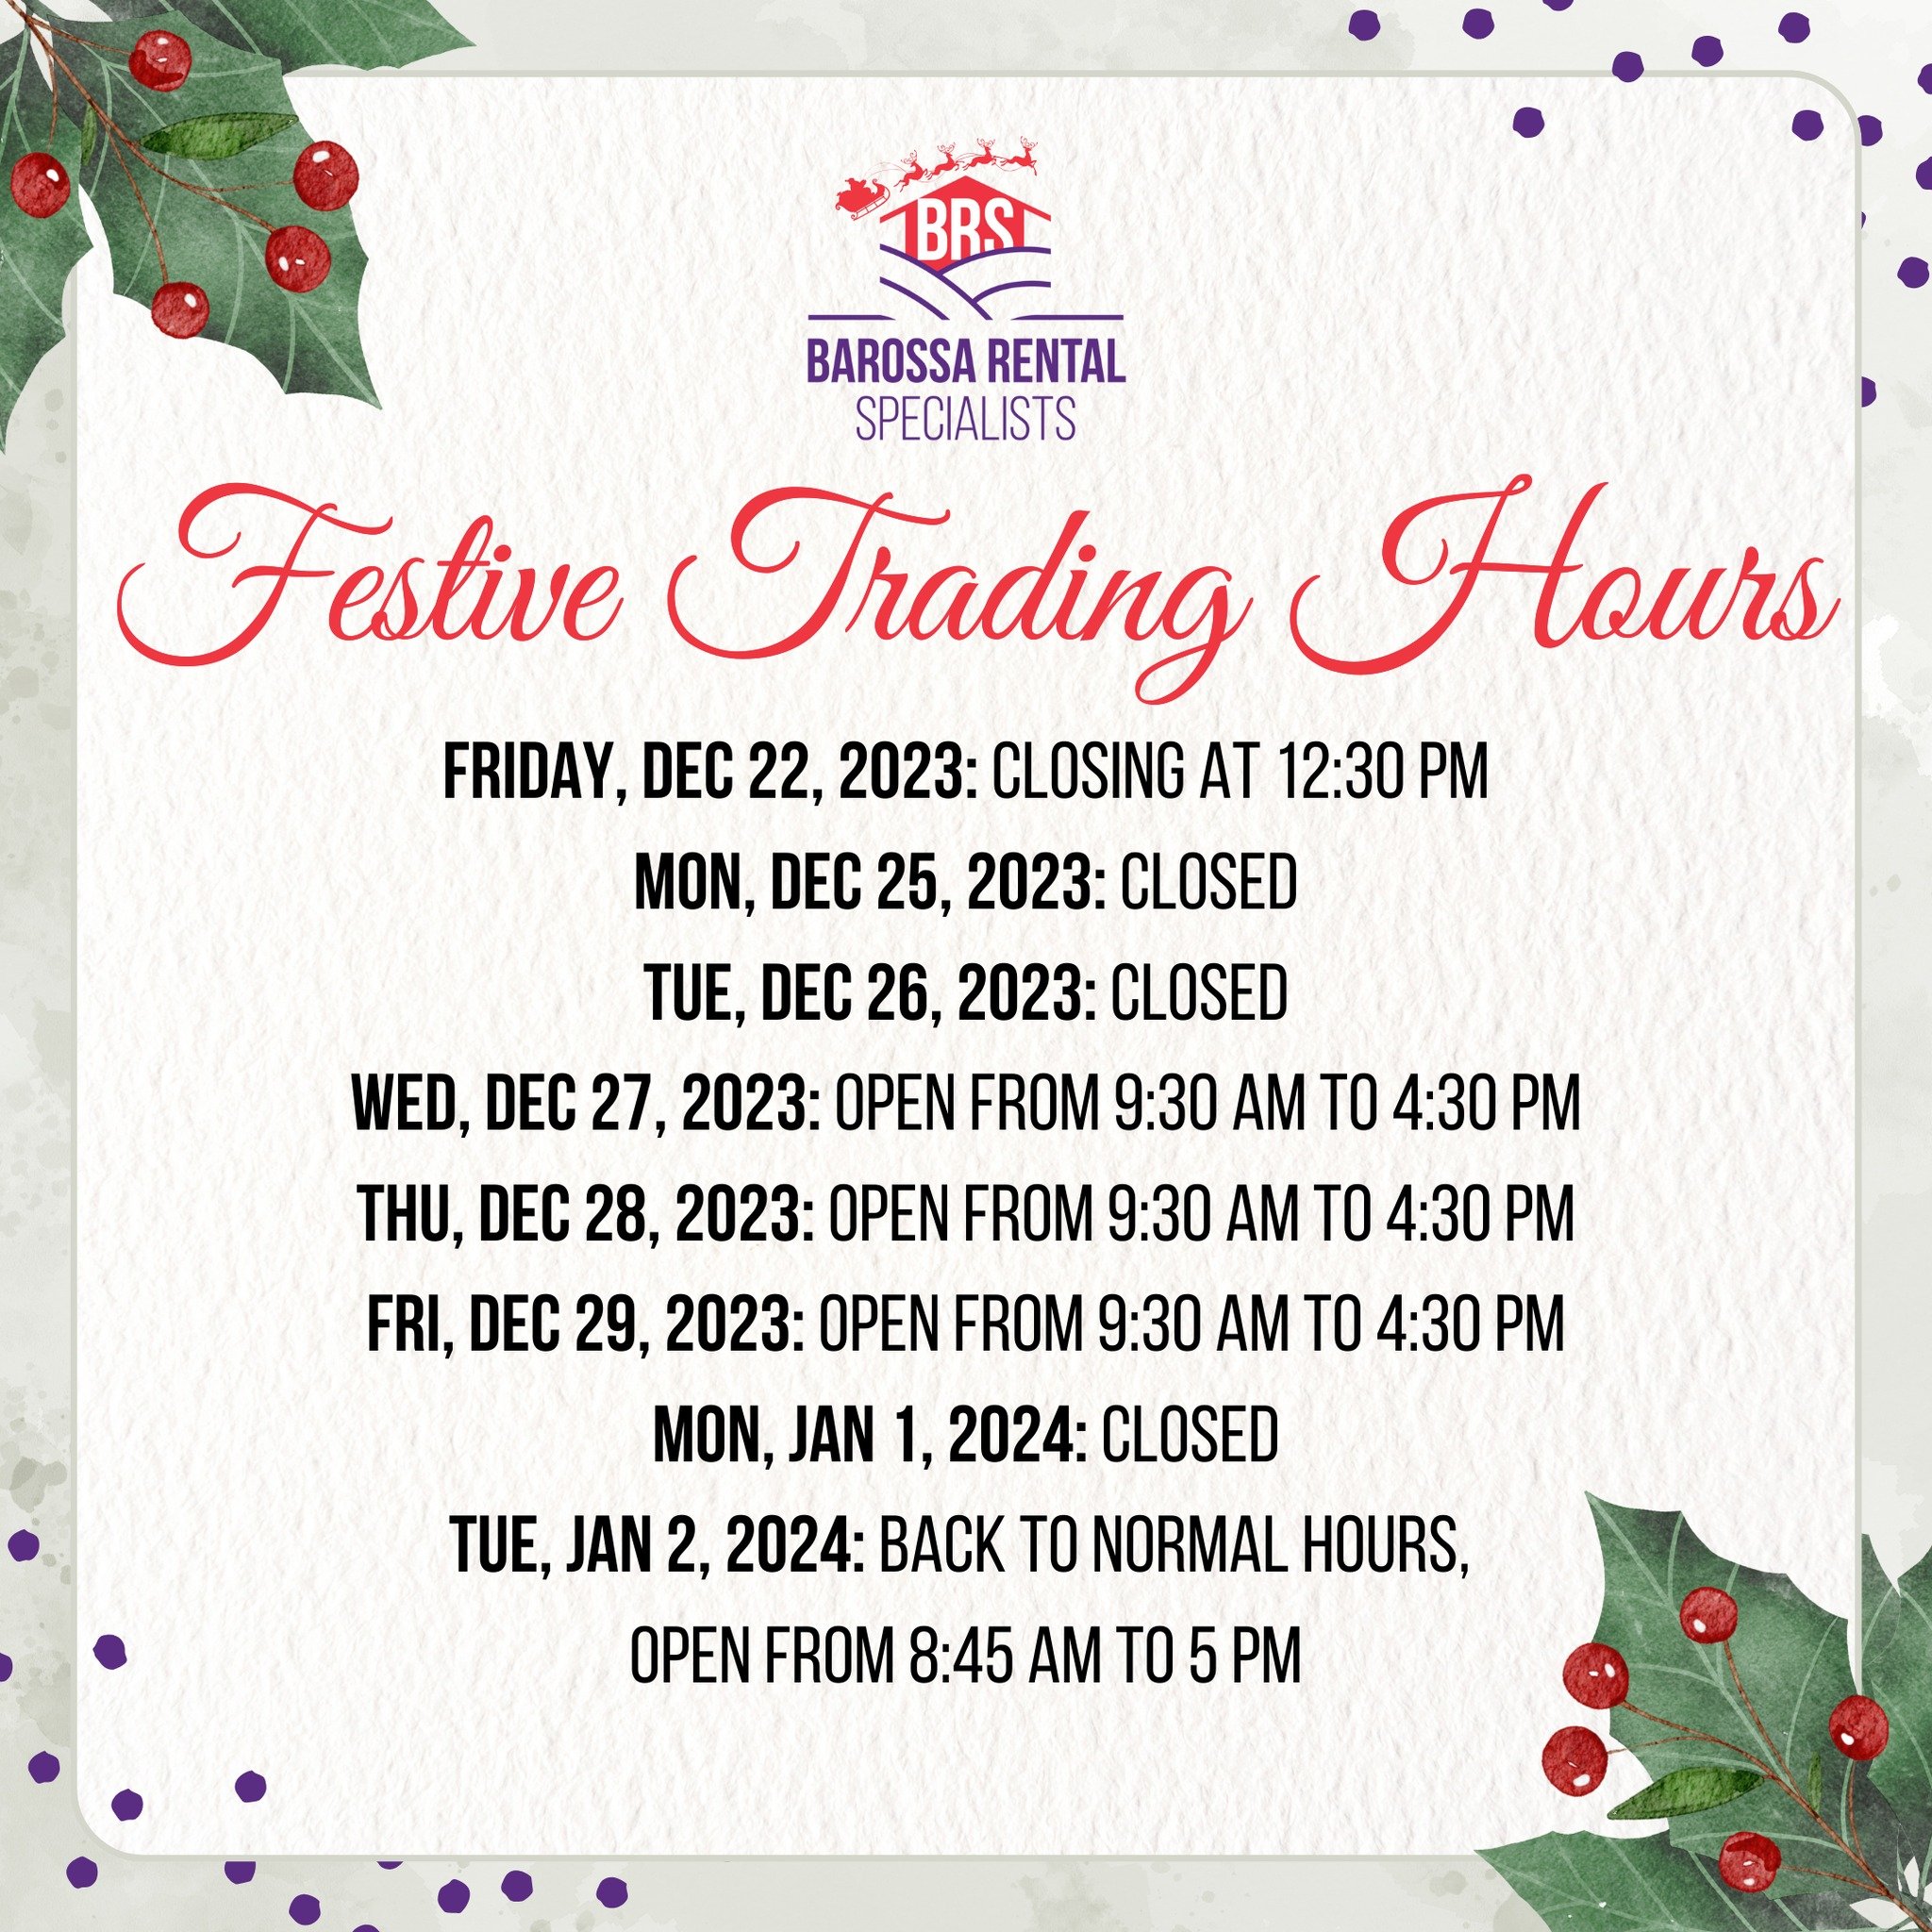 As the festive season draws near, our trading hours will have a slight change. Wishing you a joyful and healthy holiday season!

#BRS #tradinghours